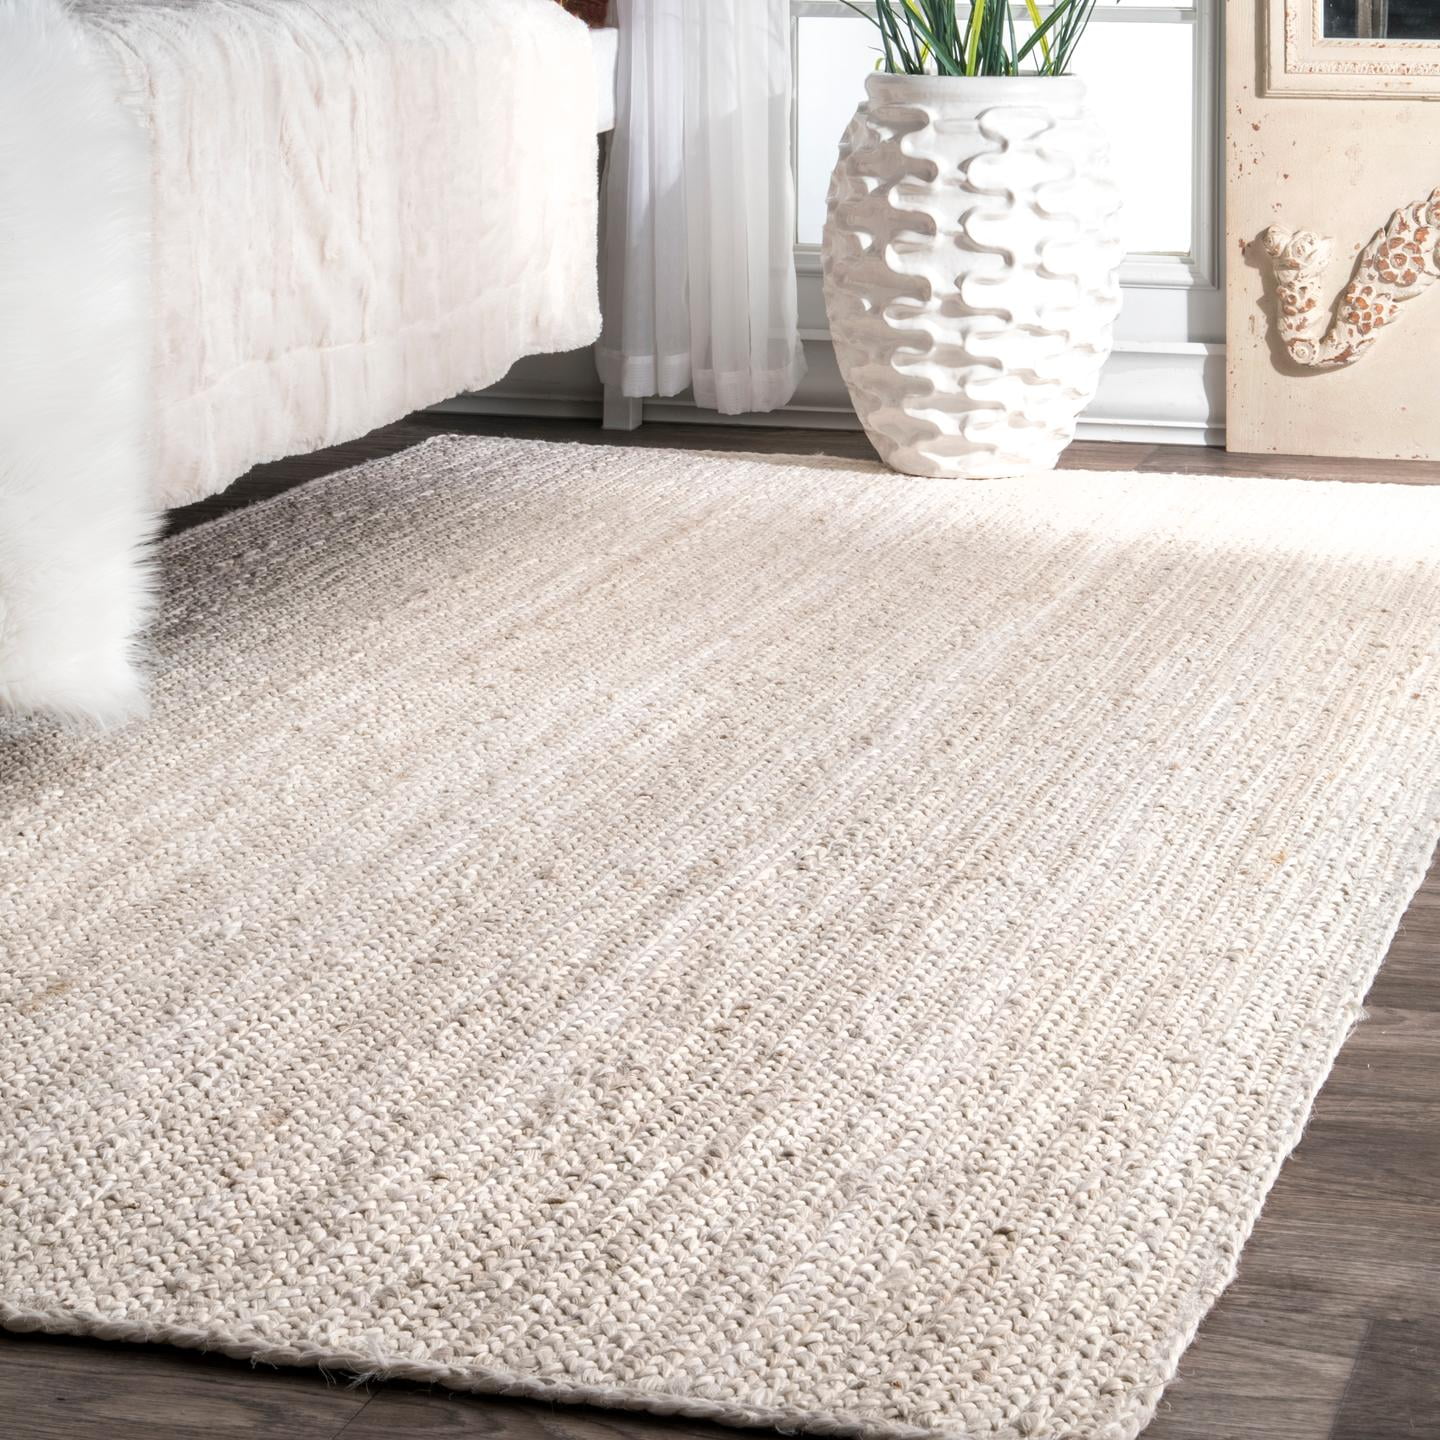 Natural 6' Round Details about   nuLOOM Rigo Hand Woven Jute Area Rug 